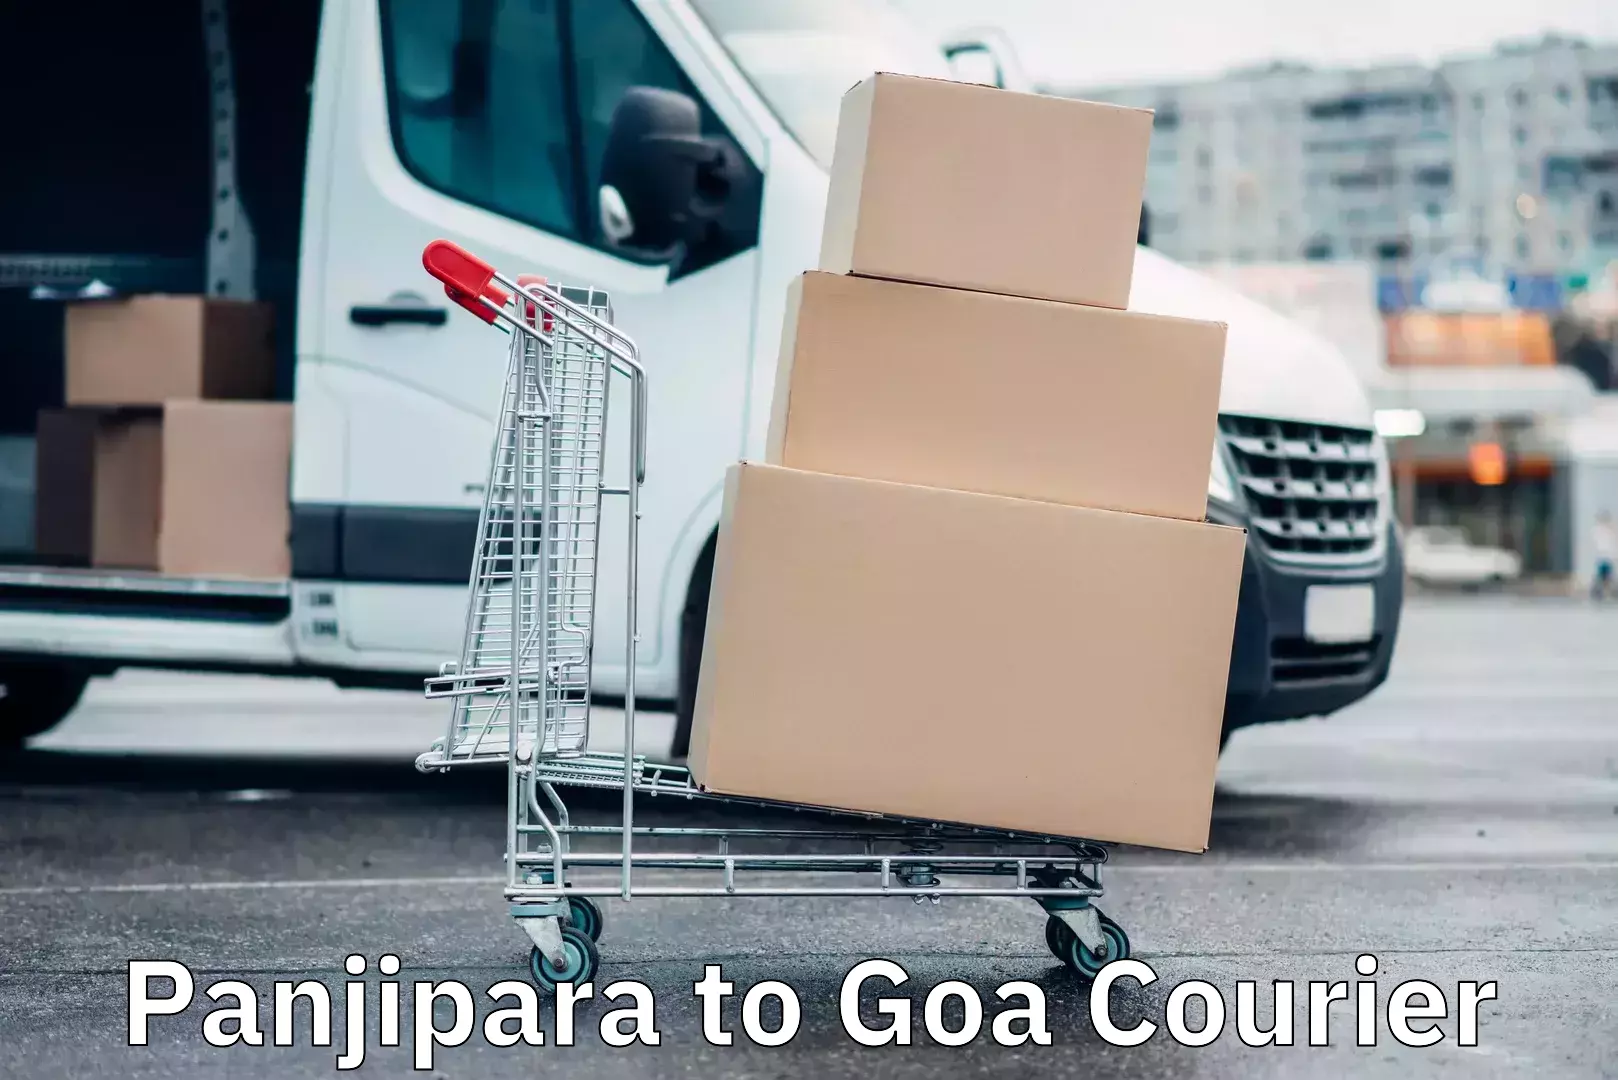 Sustainable delivery practices Panjipara to Goa